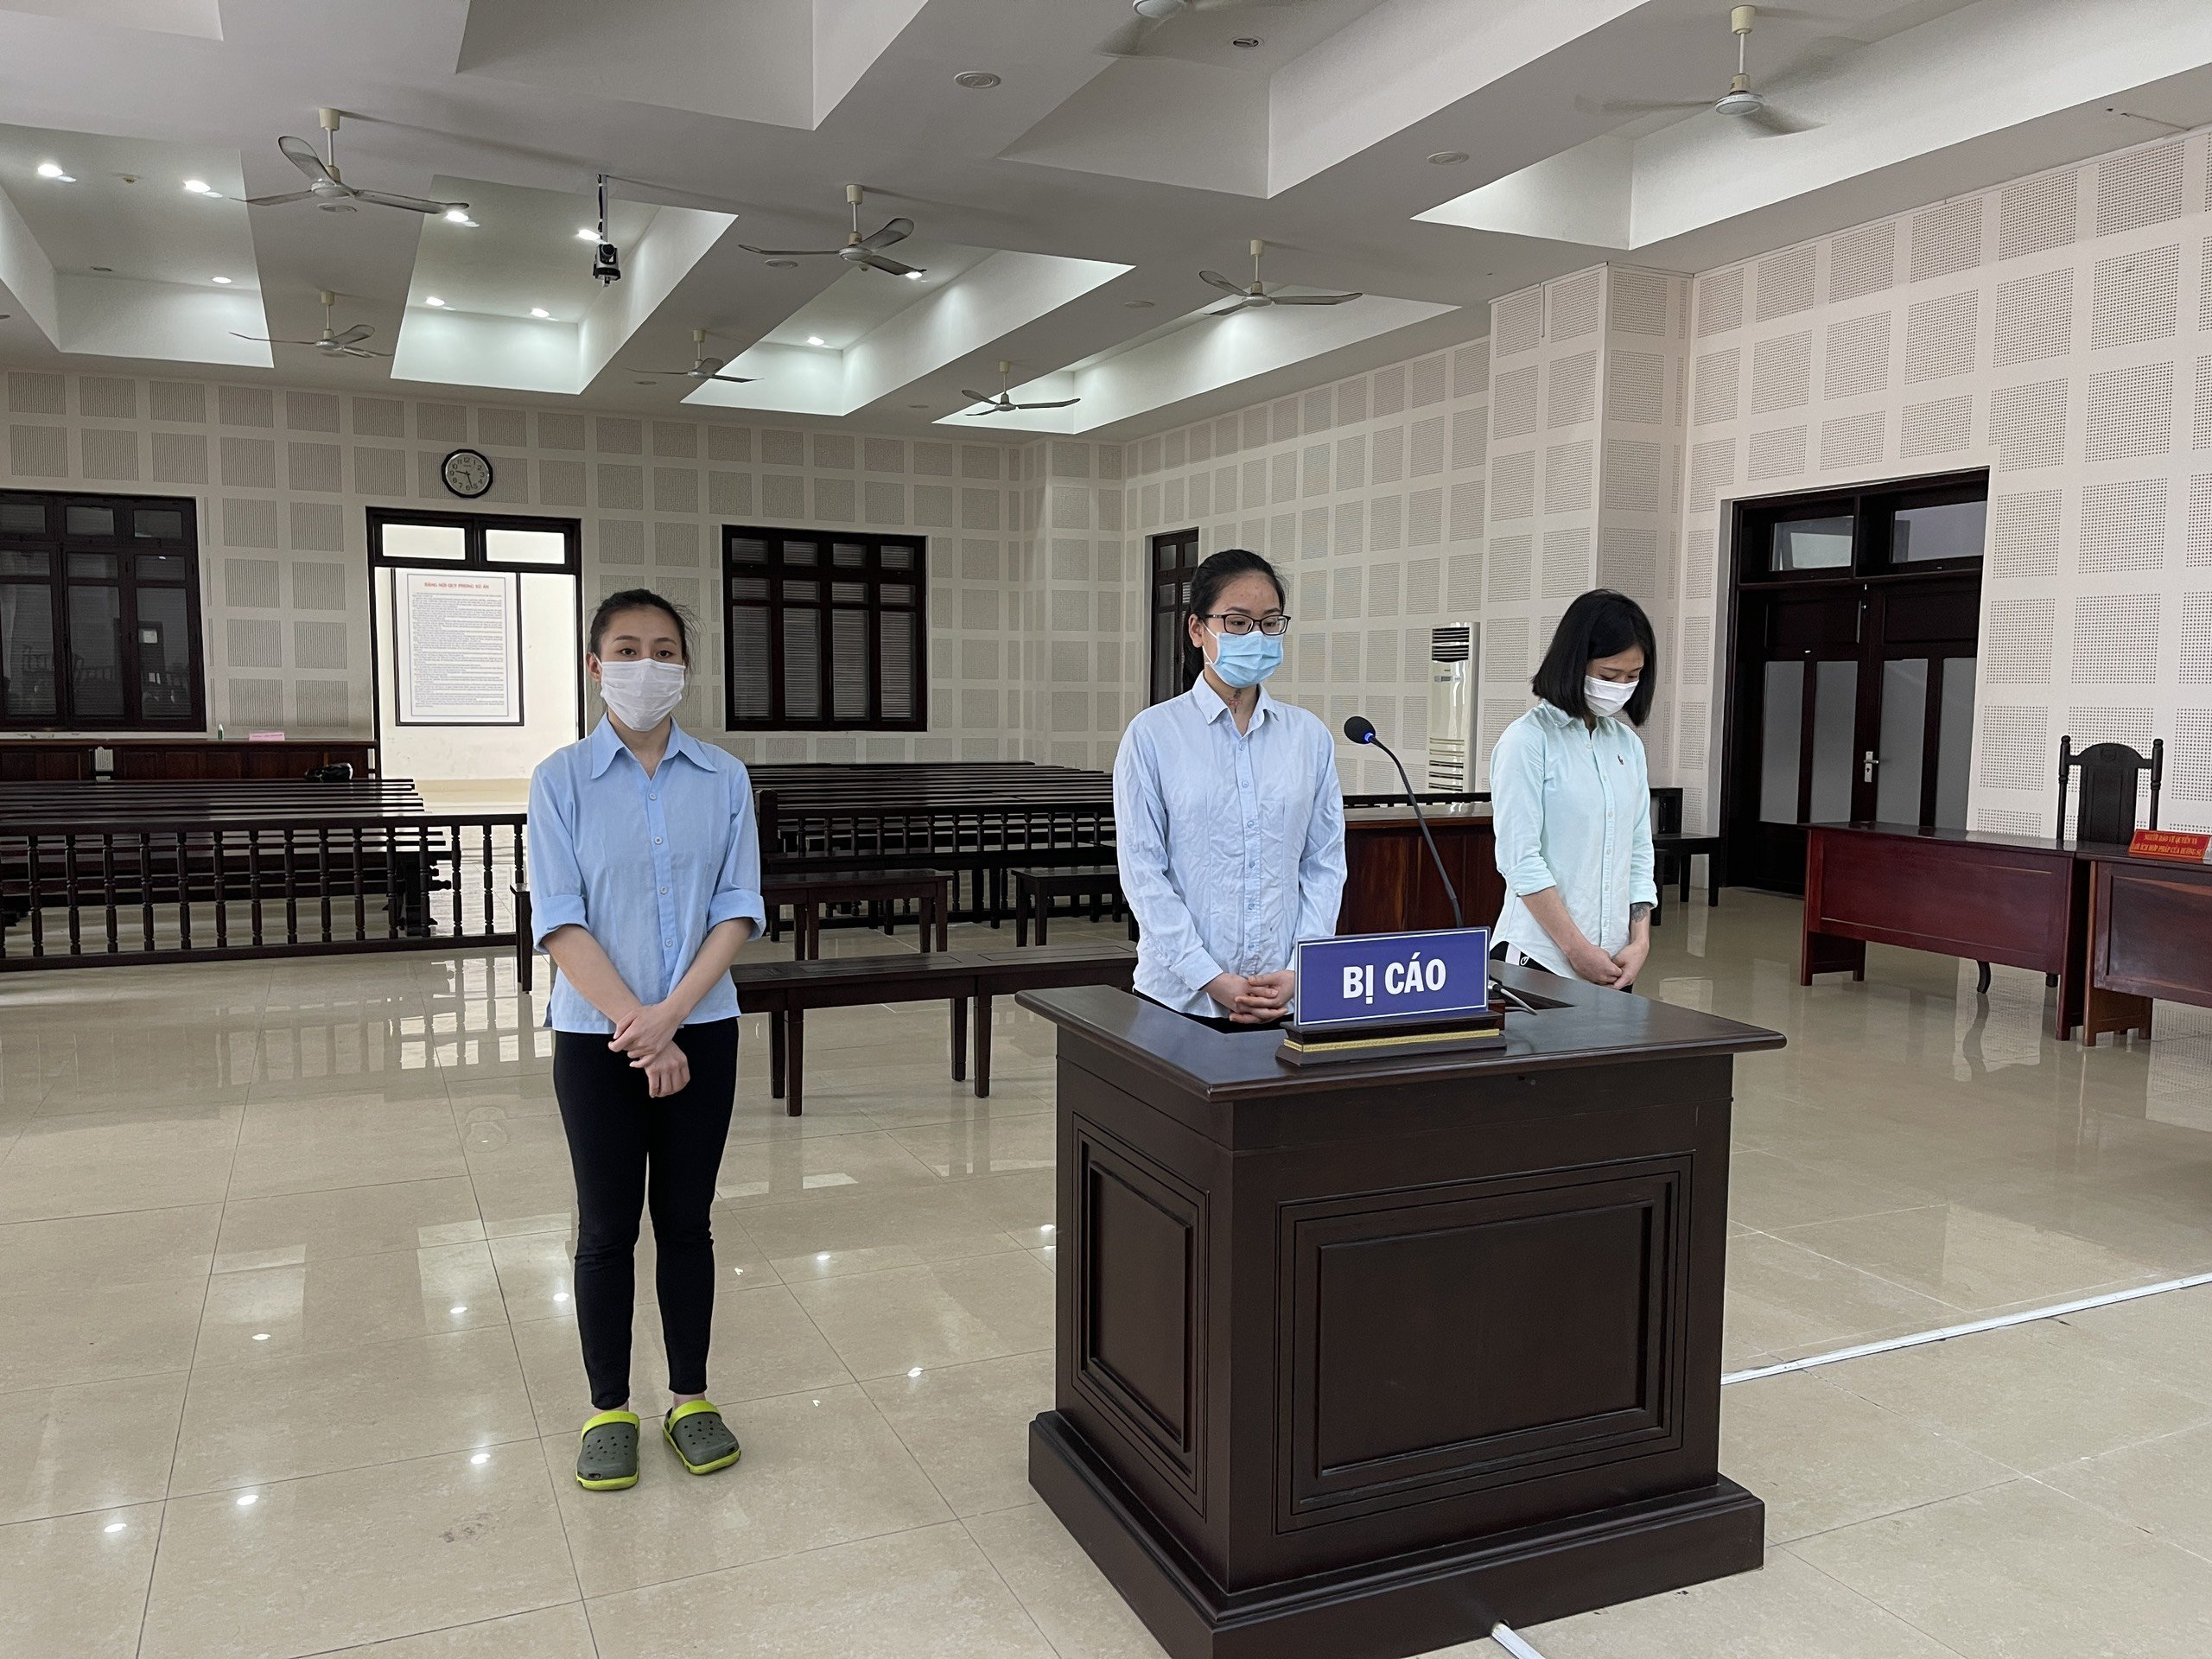 Allowing Chinese people to enter illegally in 'underground', 3 girls sentenced to prison